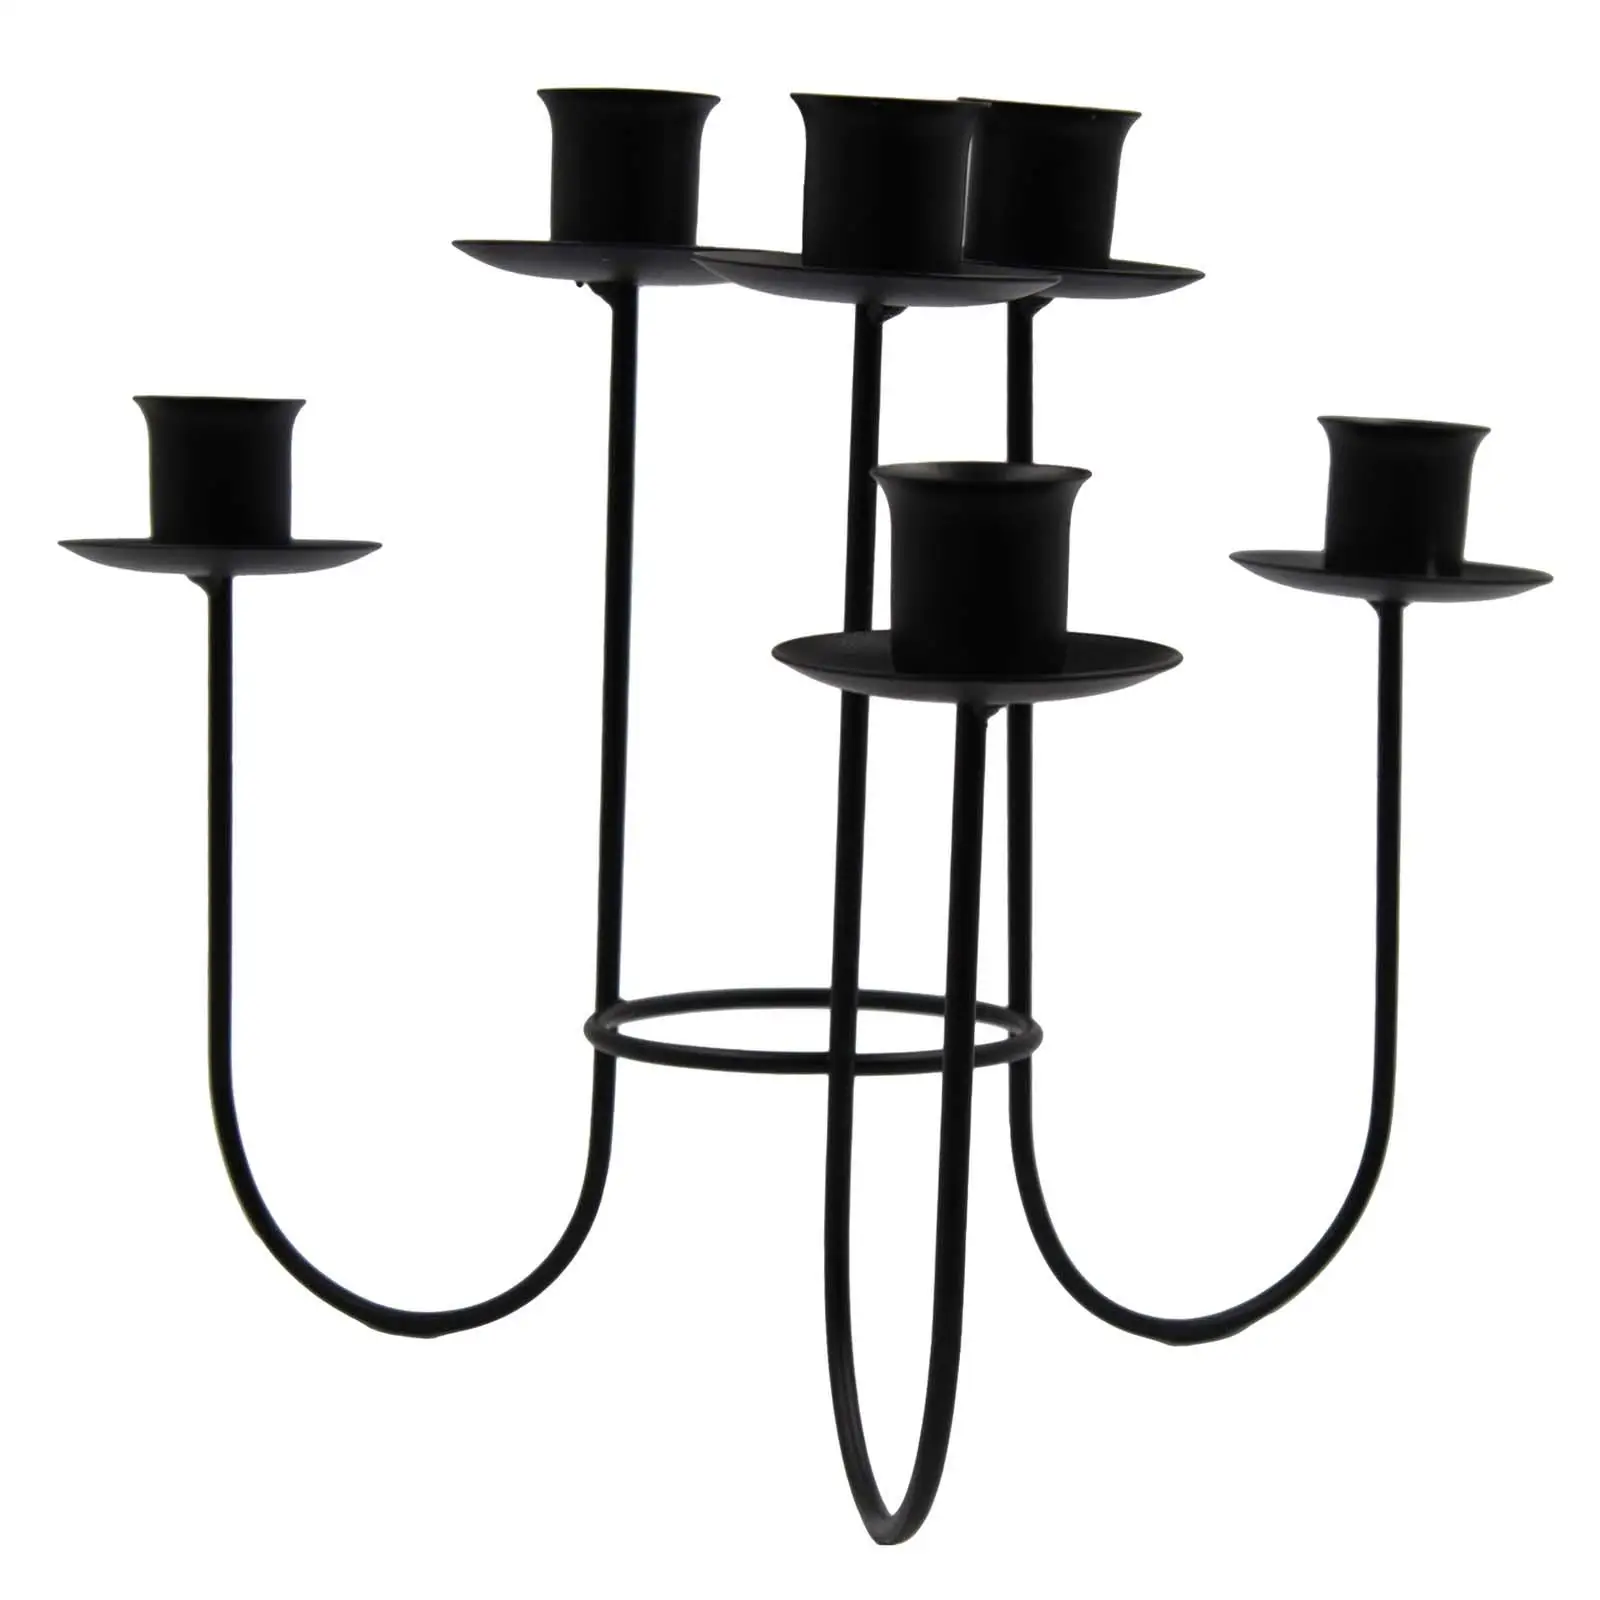 Multi Arms Metal Candle Holder Candle Stand 10x8inch for Festive Party Decor